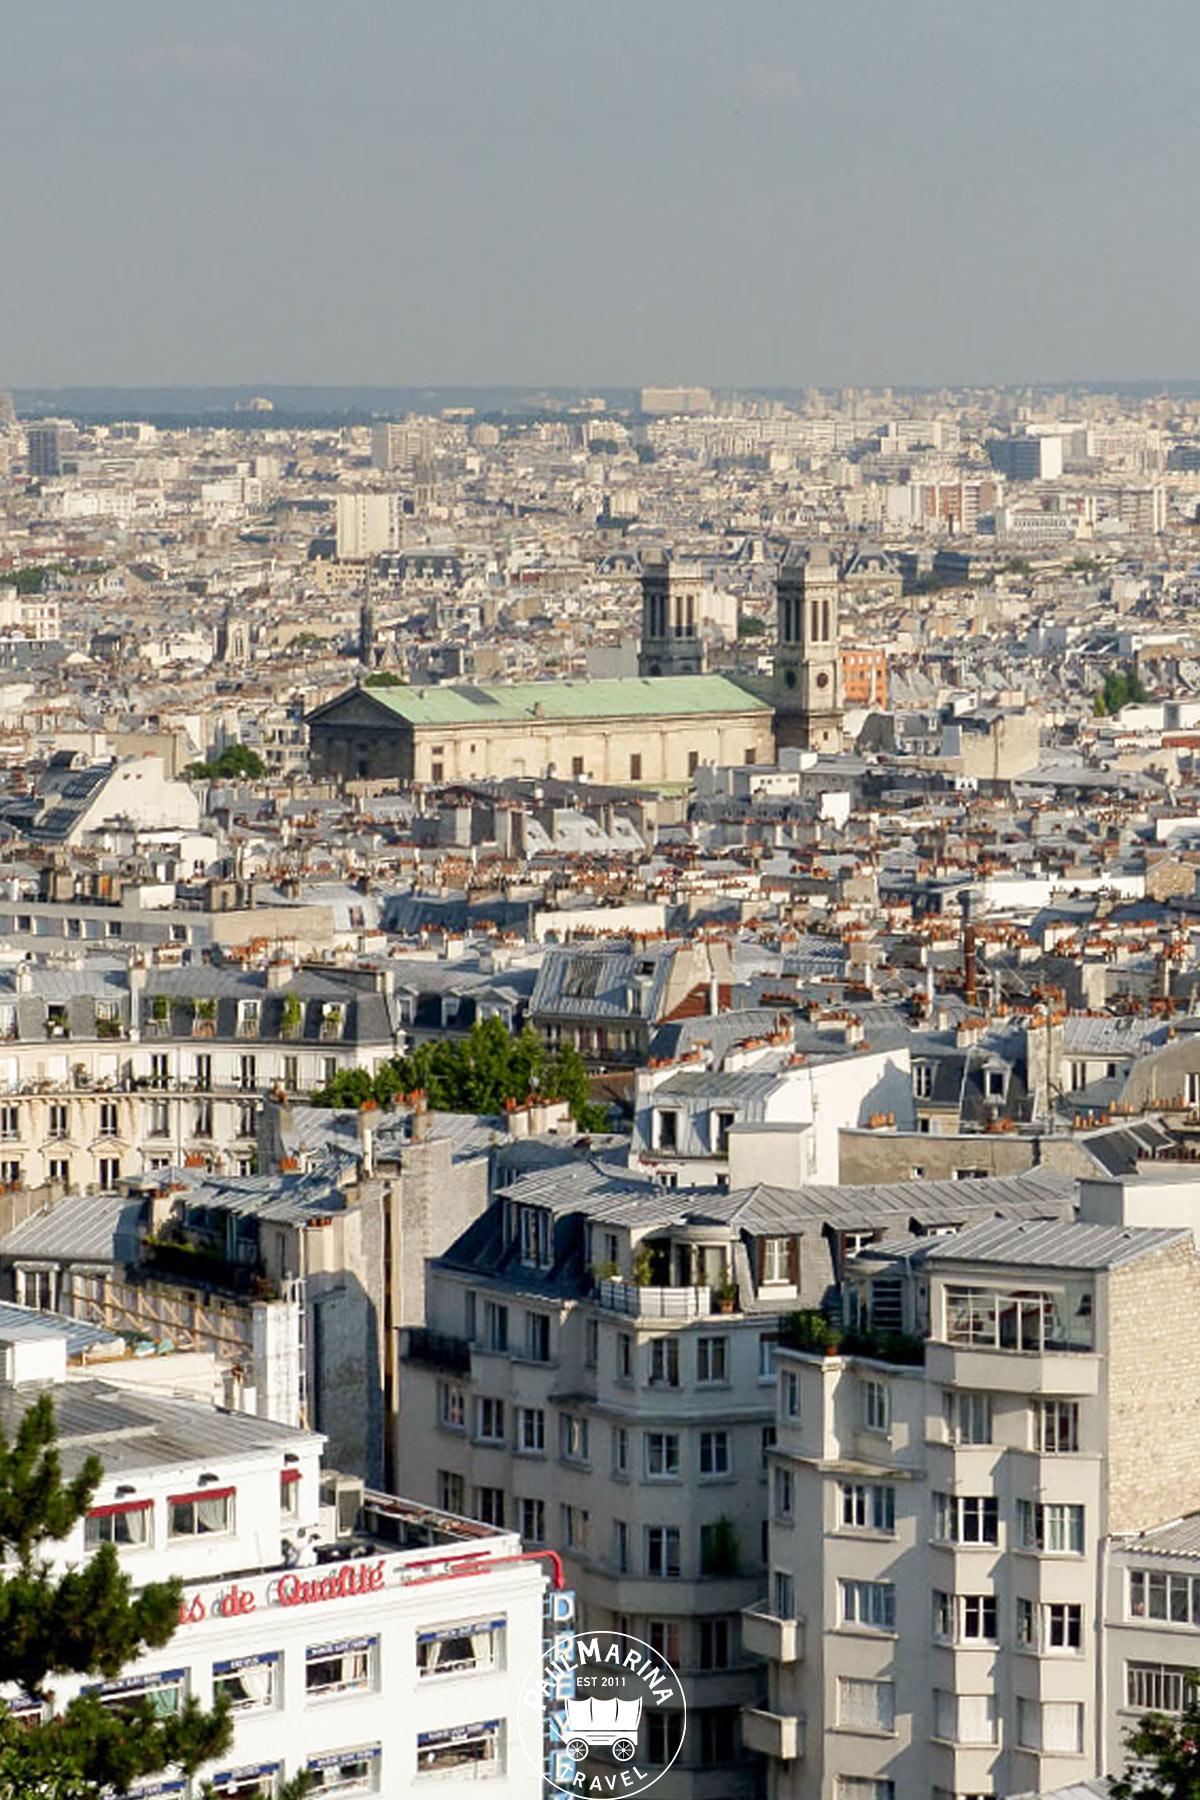 View from Montmartre Basilica lookout to Notre Dame de Paris Cathedral before the 2019 fire